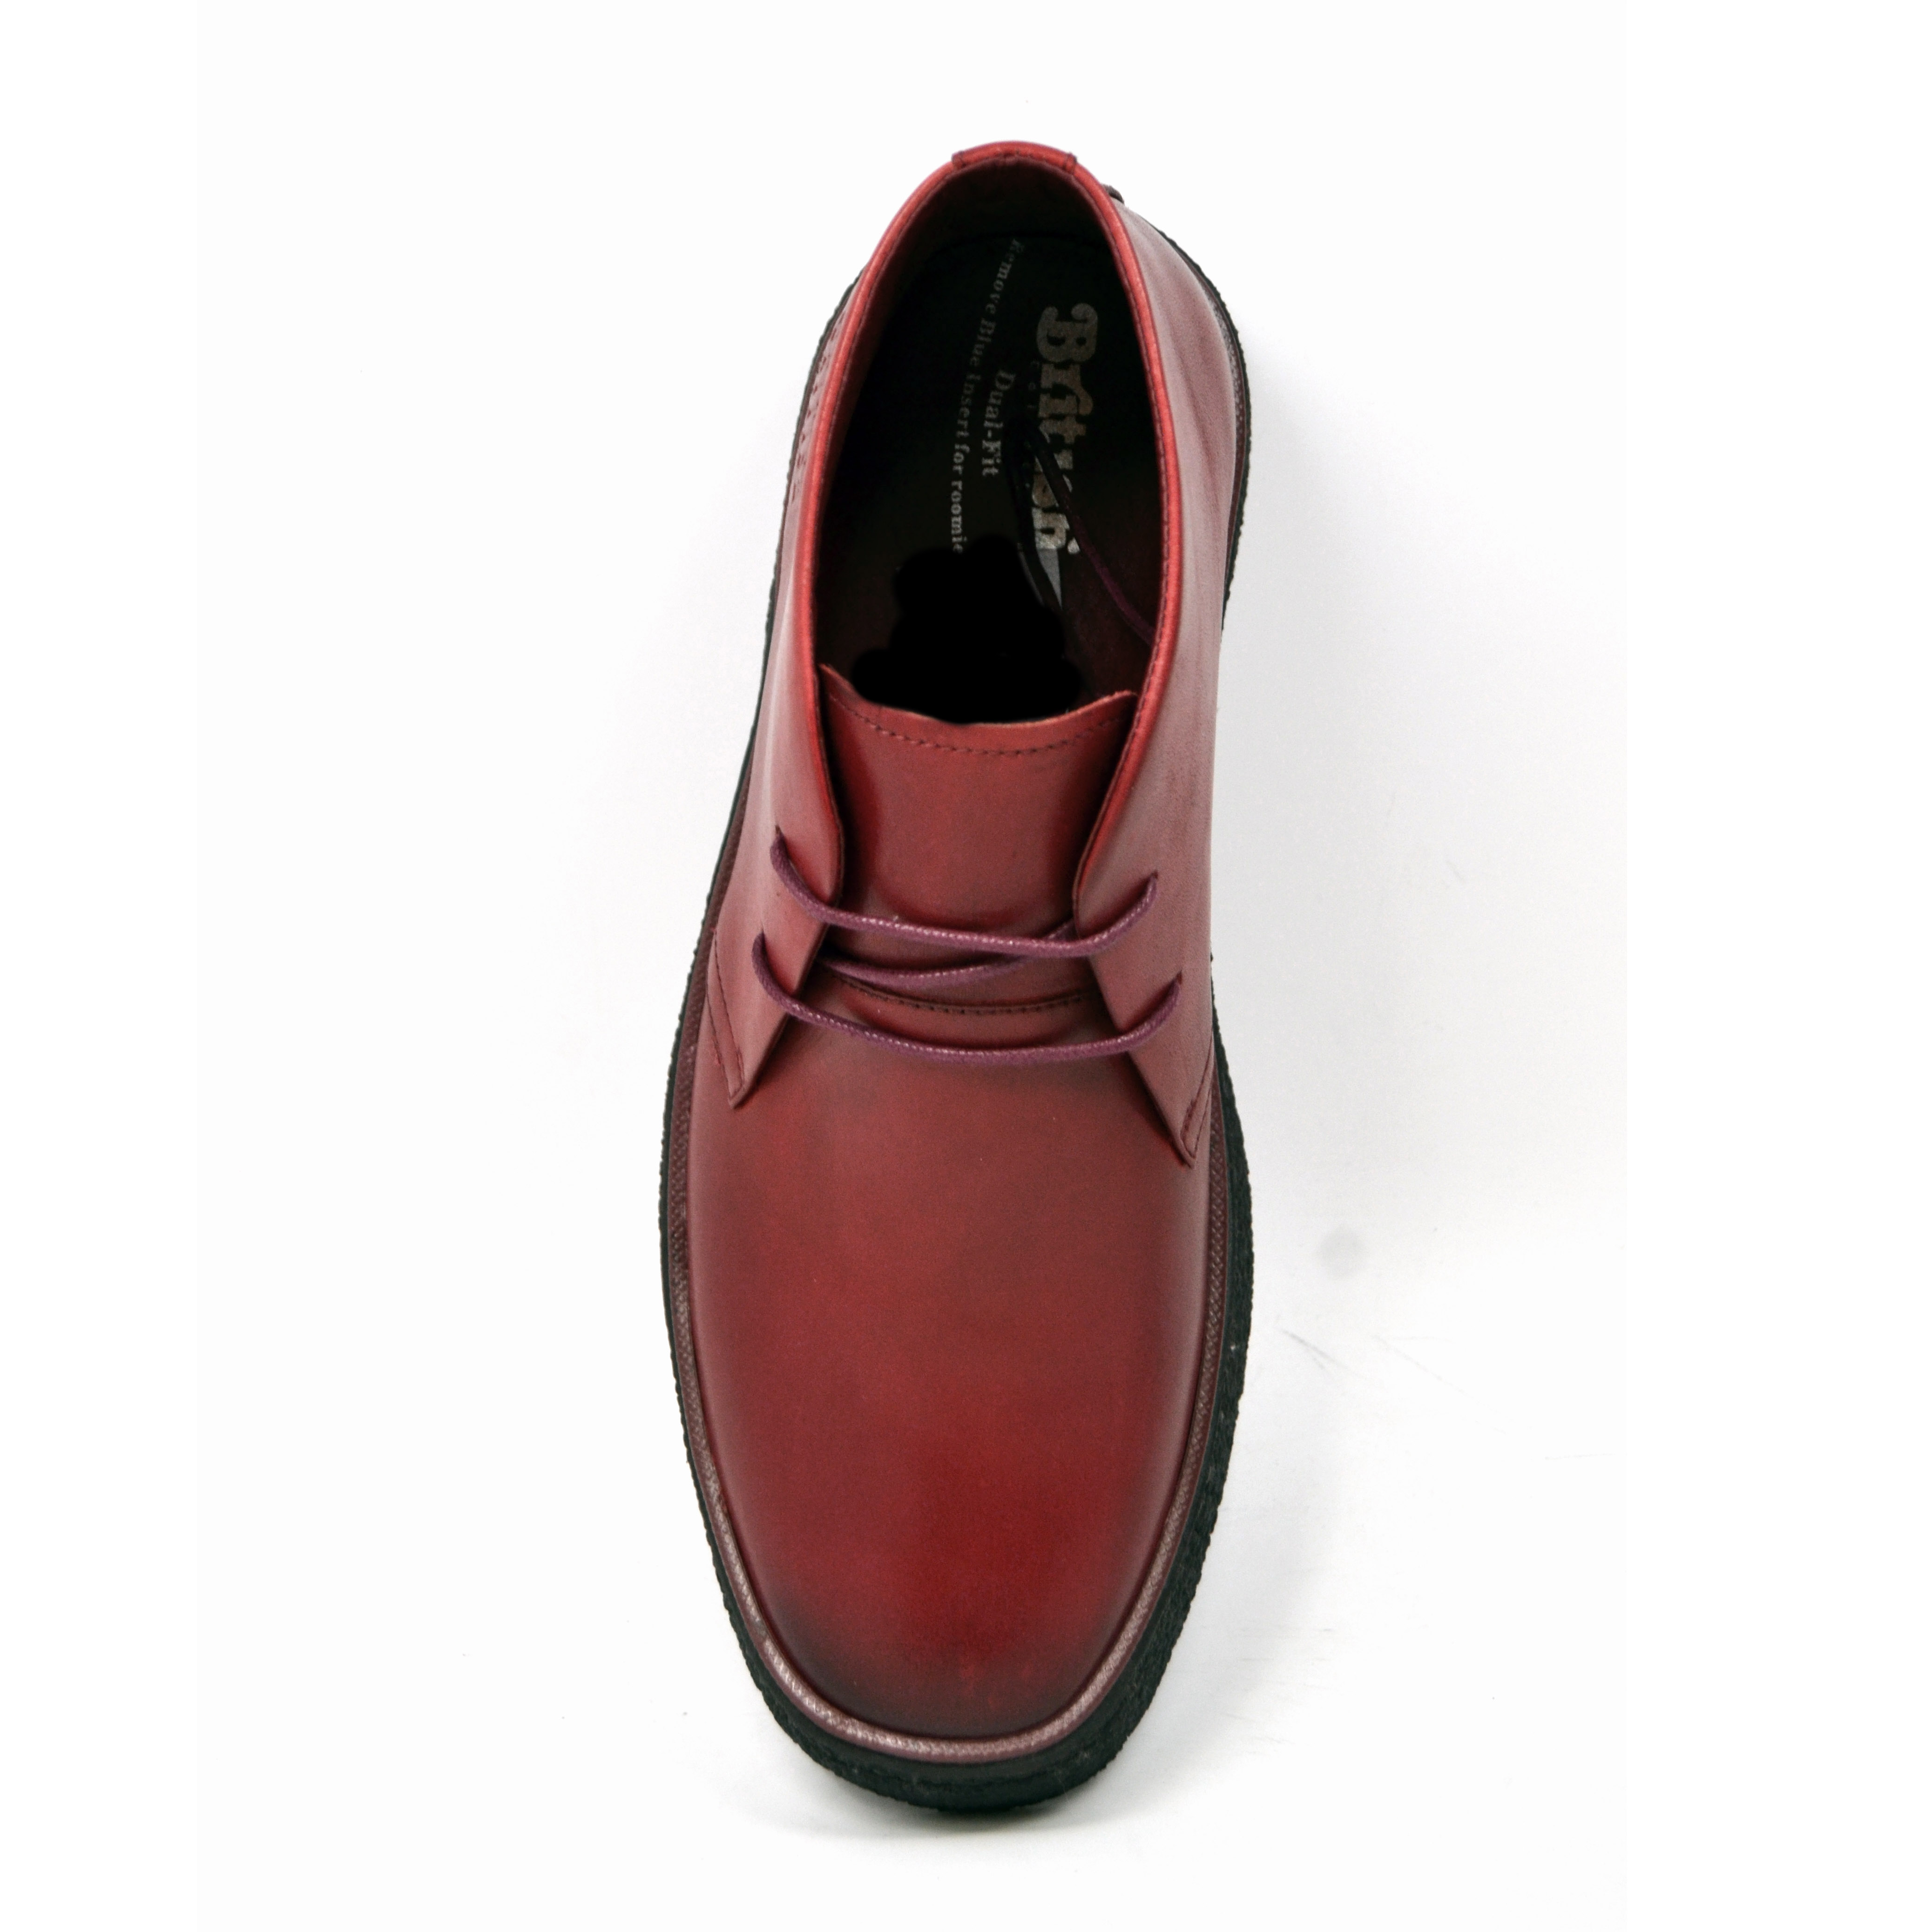 Download Classic Playboy Chukka Boot Wine Leather 1226-7 - $99.99 ...